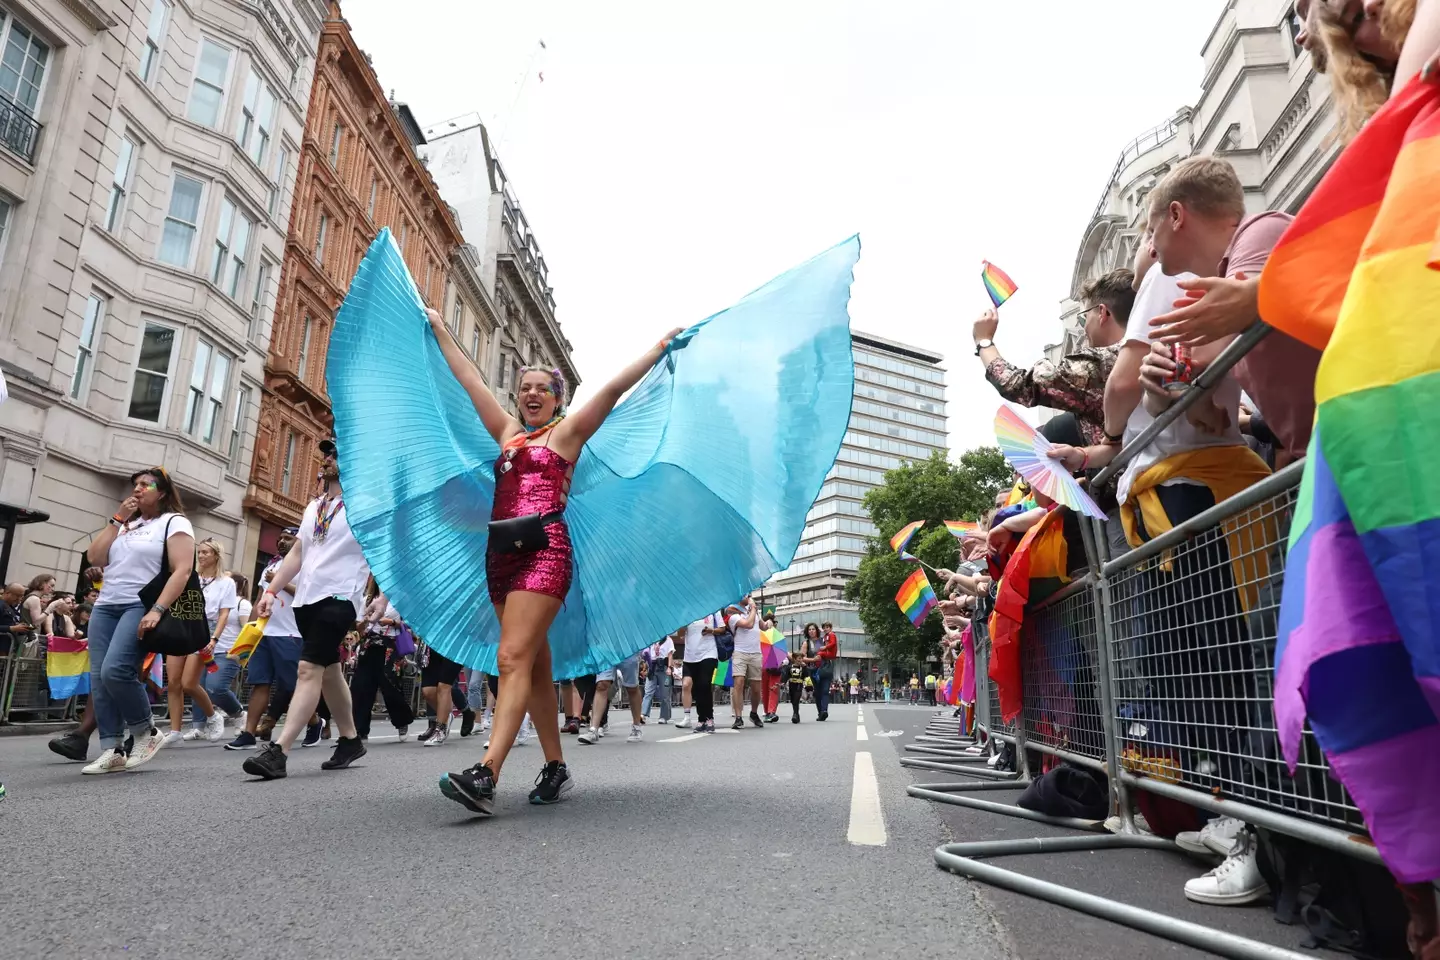 Members of the LGBTQ+ community and their allies joined the march in the UK’s capital today.